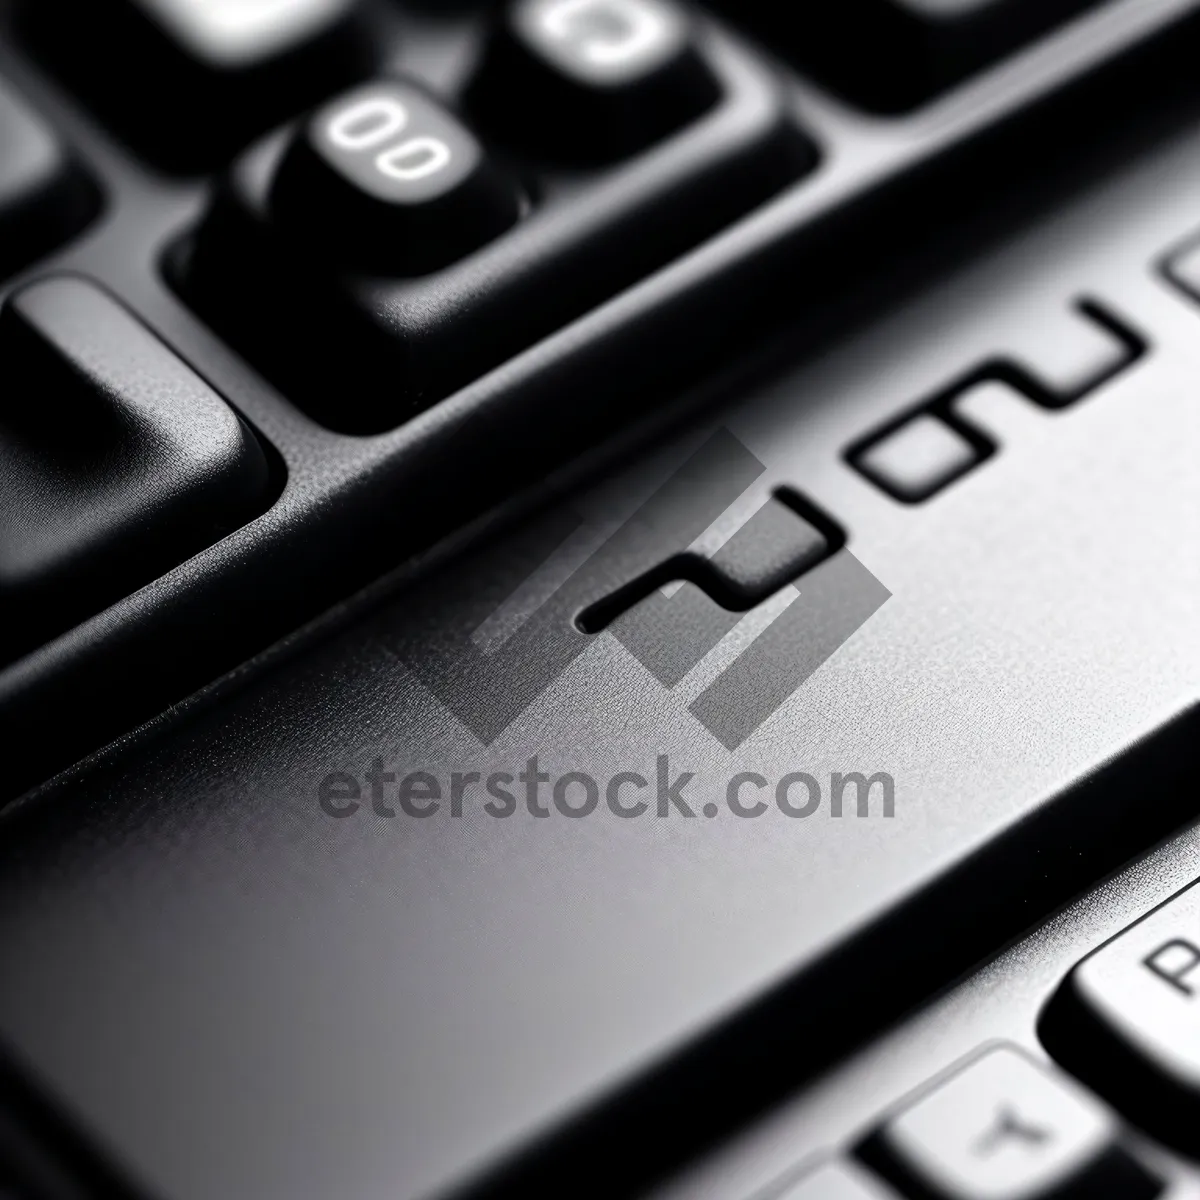 Picture of Digital Keyboard for Efficient Data Input and Communication